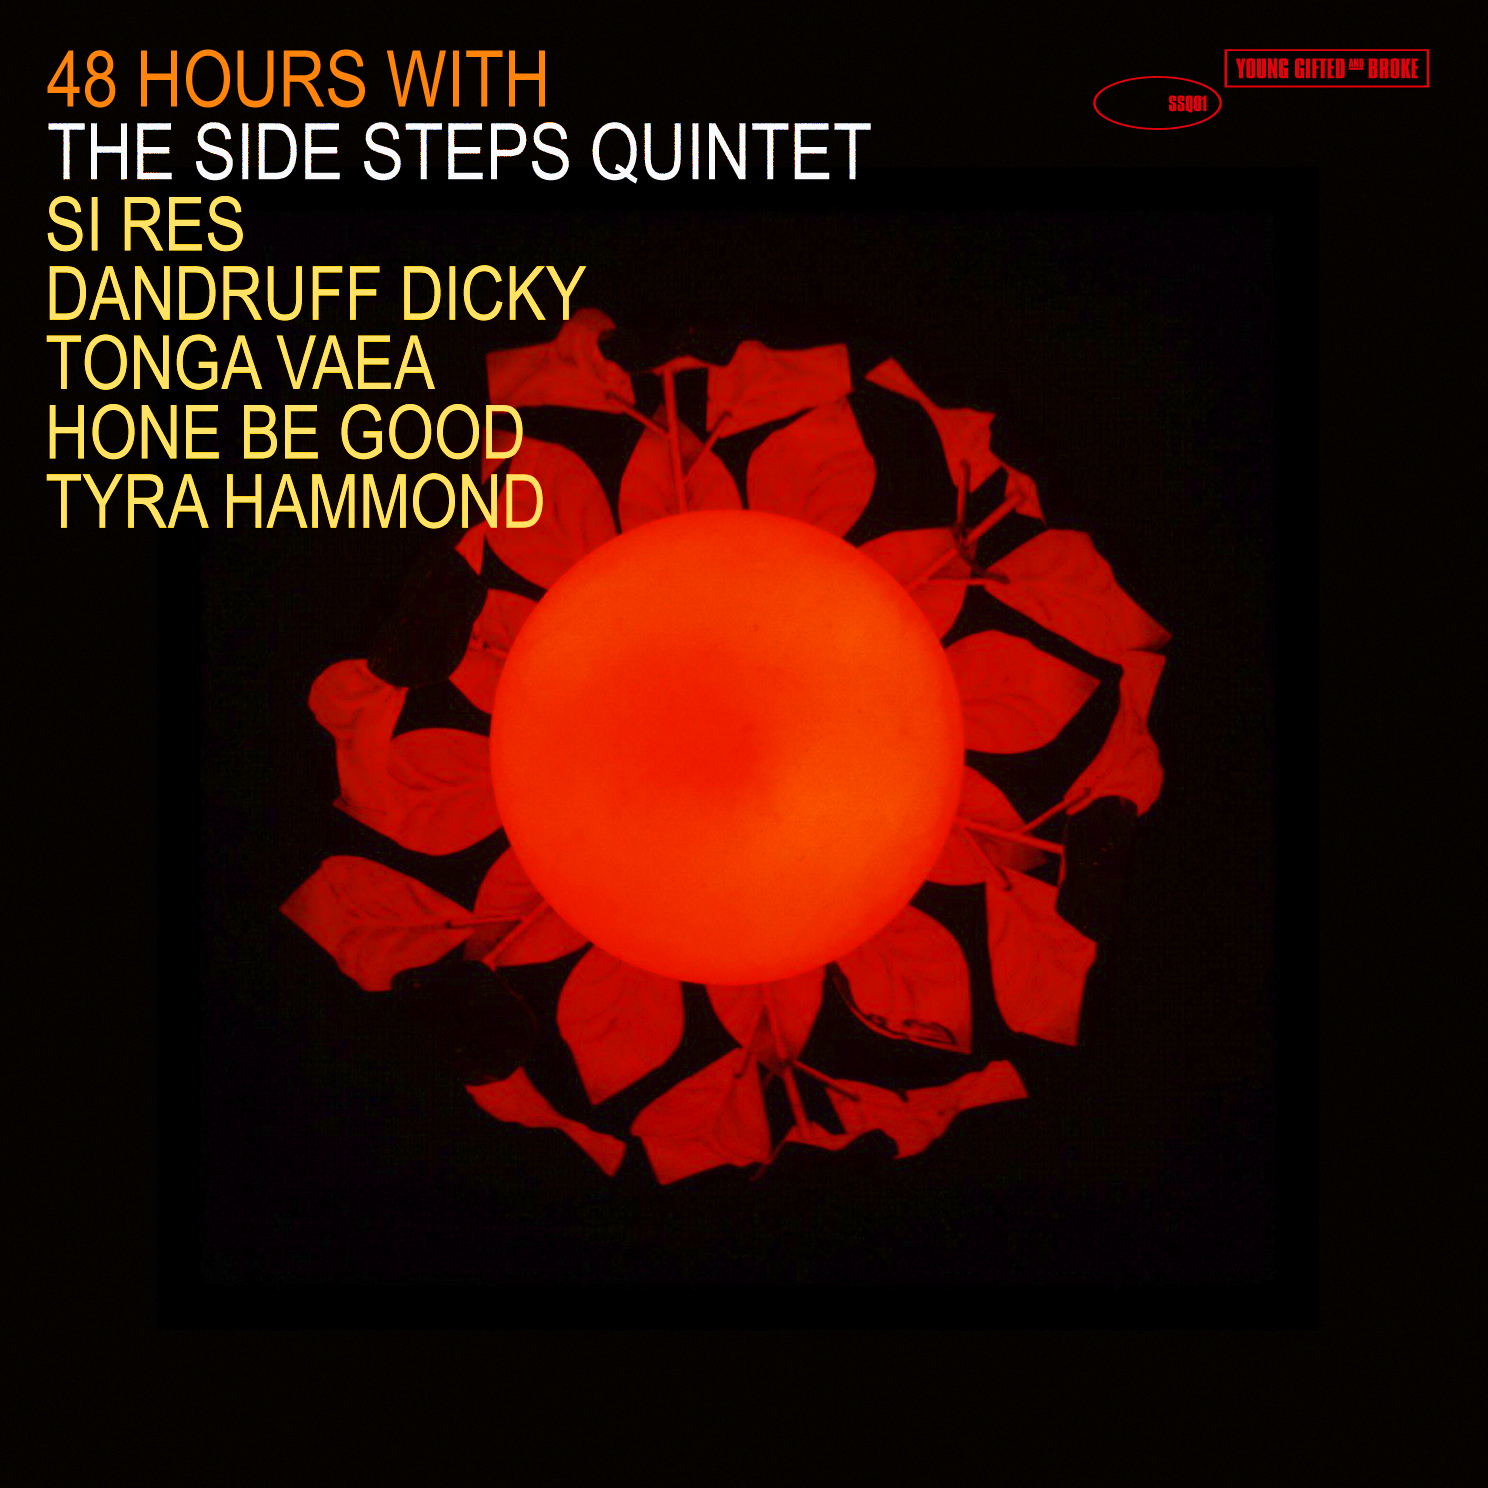 Free Download: The Side Steps Quintet – 48 Hours With The Side Steps Quintet